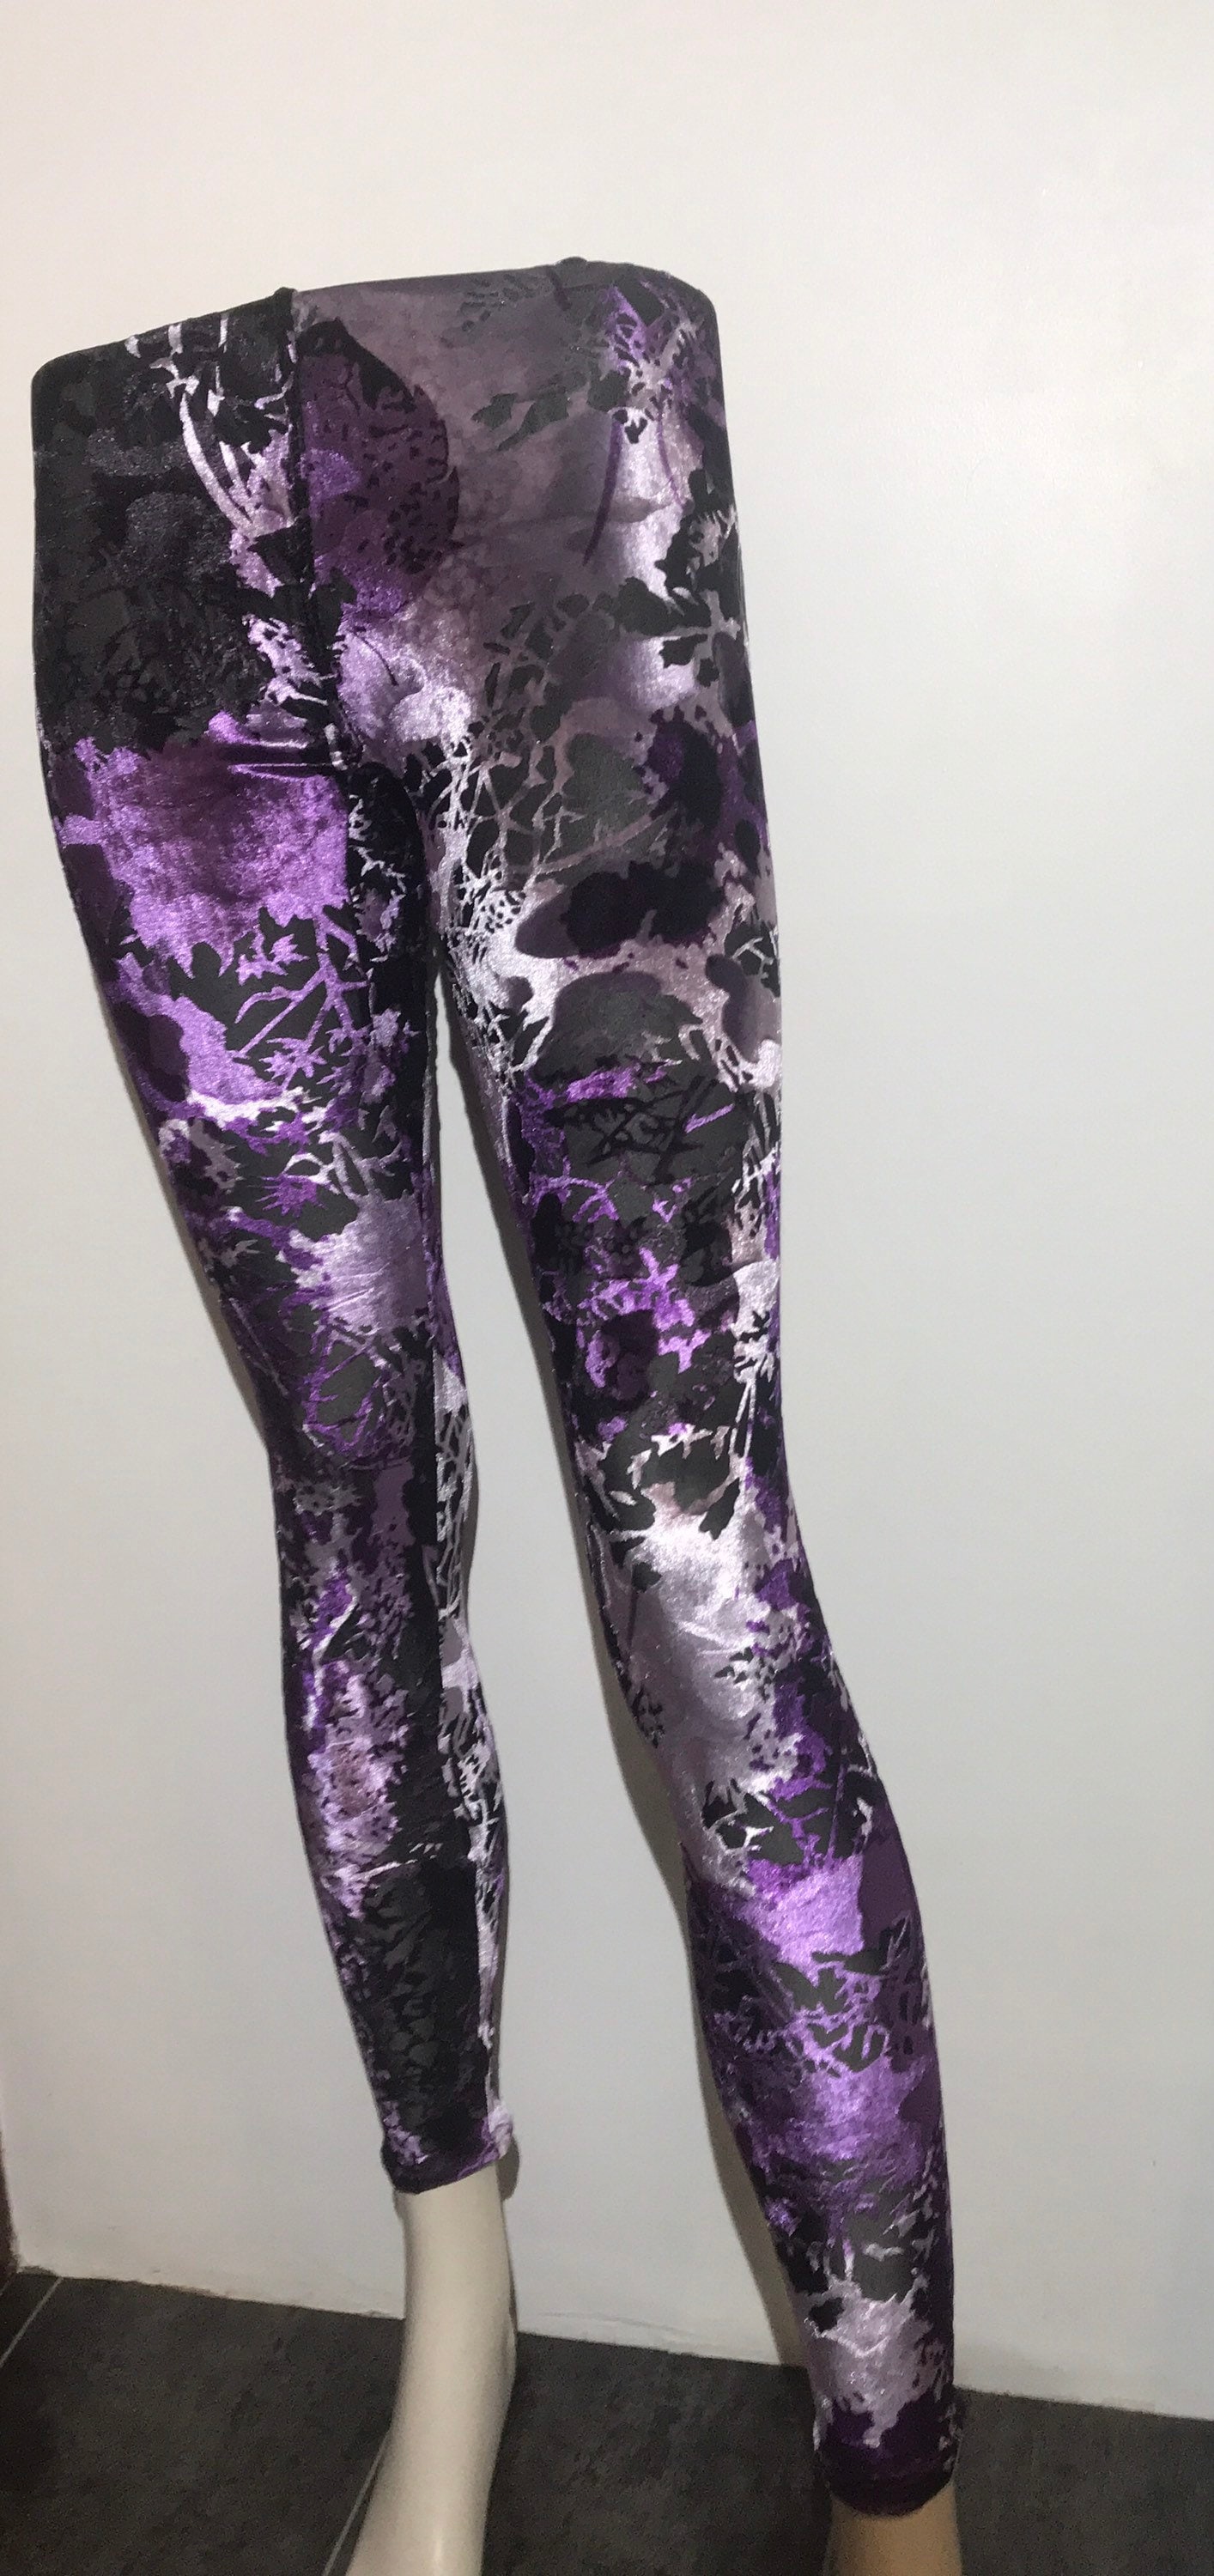 Shiny Metallic Leggings Leopard Tracking  International Society of  Precision Agriculture